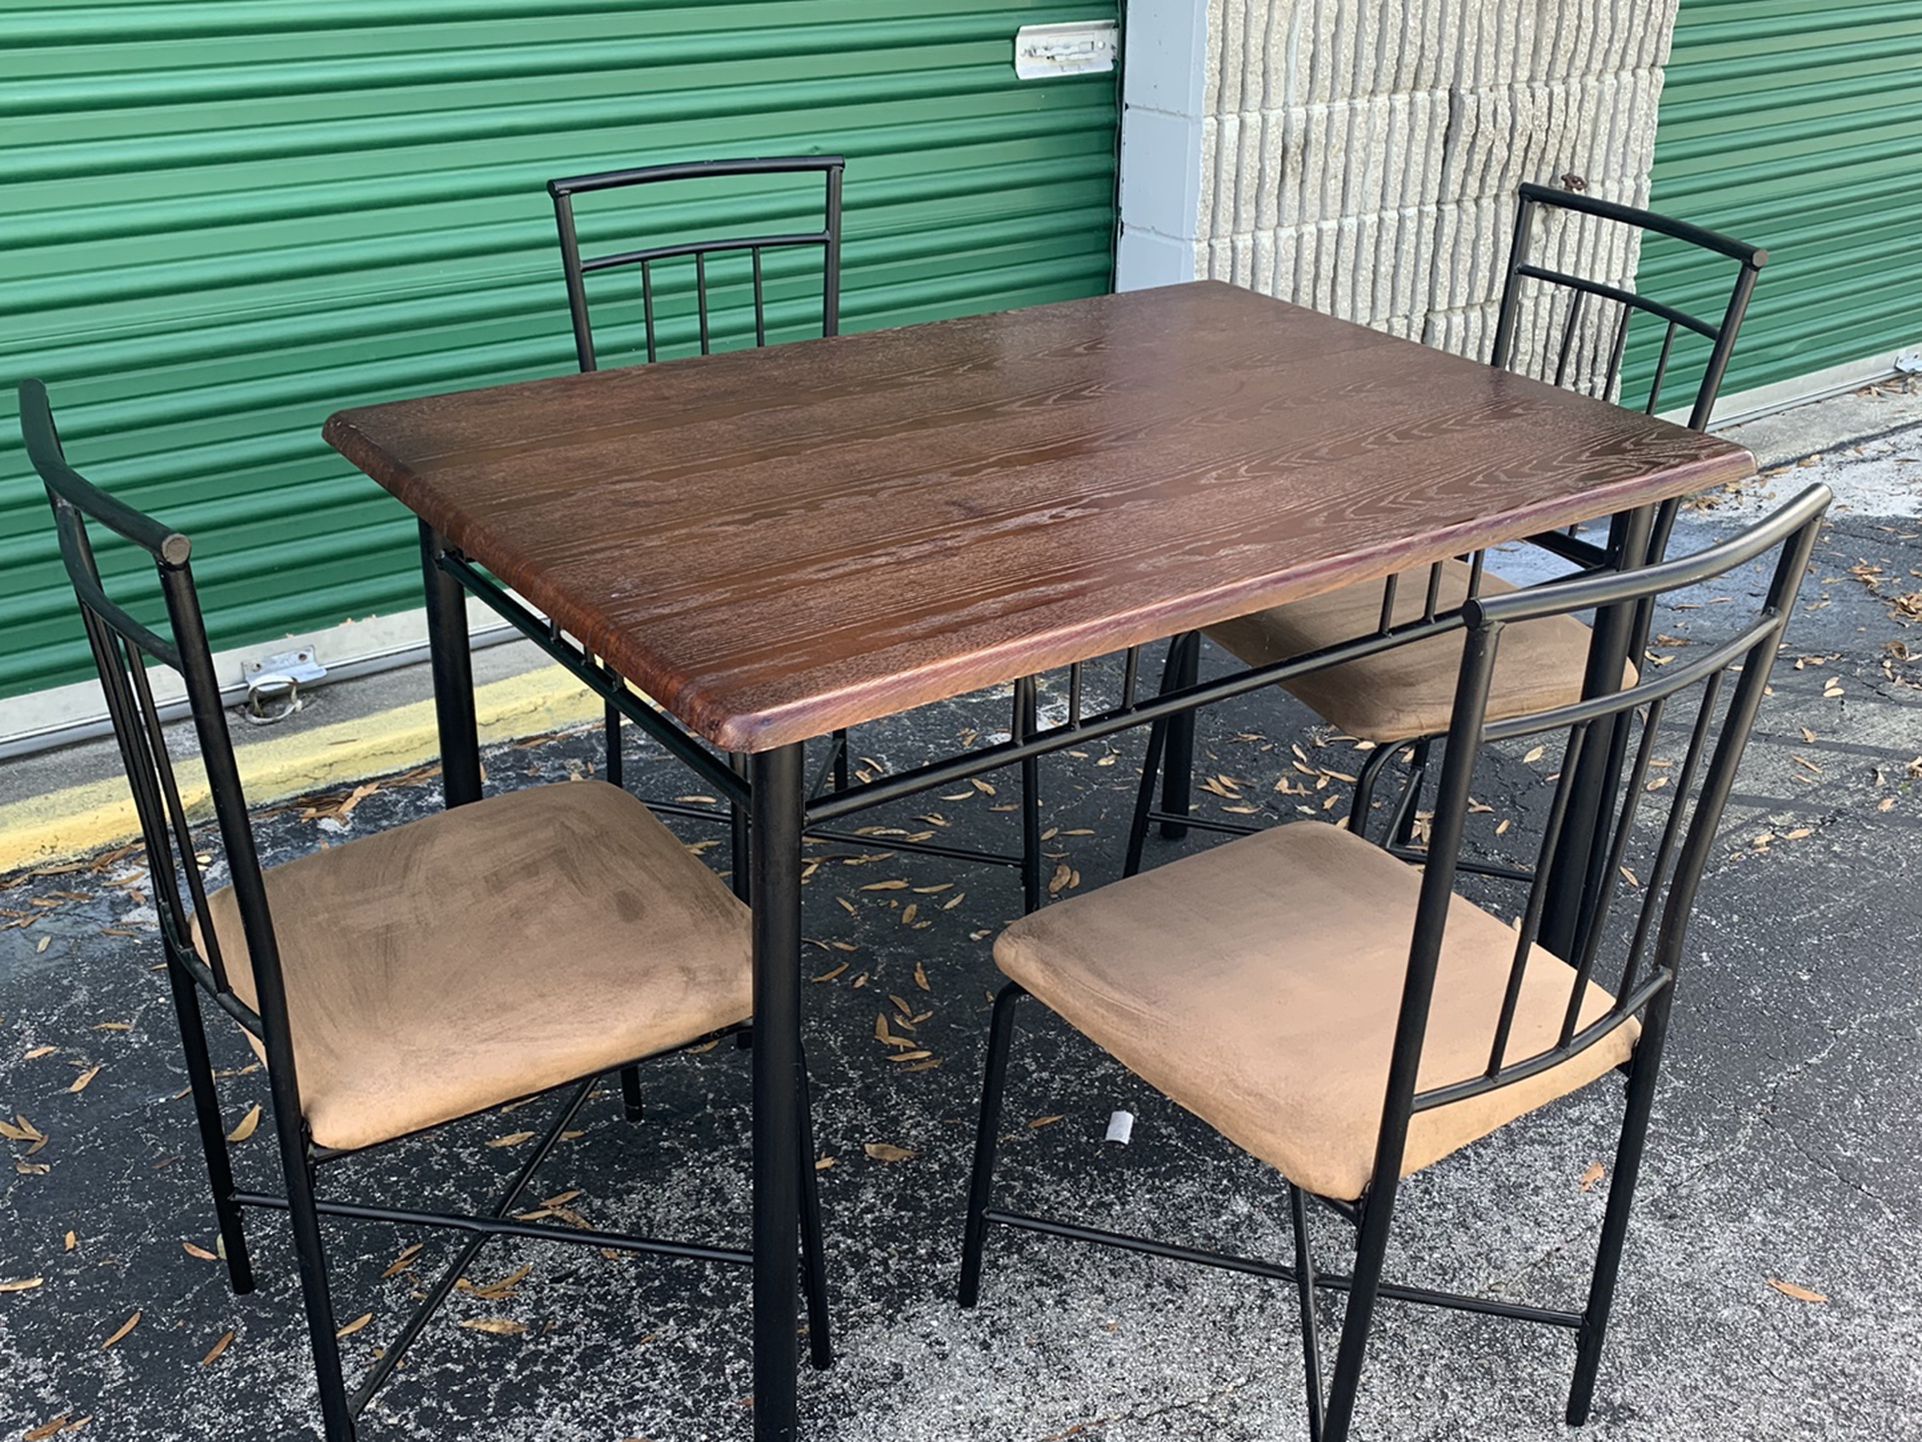 Cute Kitchen / Dining Room Table With 4 Metal Chairs With Microfiber Cushions. Table measures 46" long x 32" deep x 30.5" tall